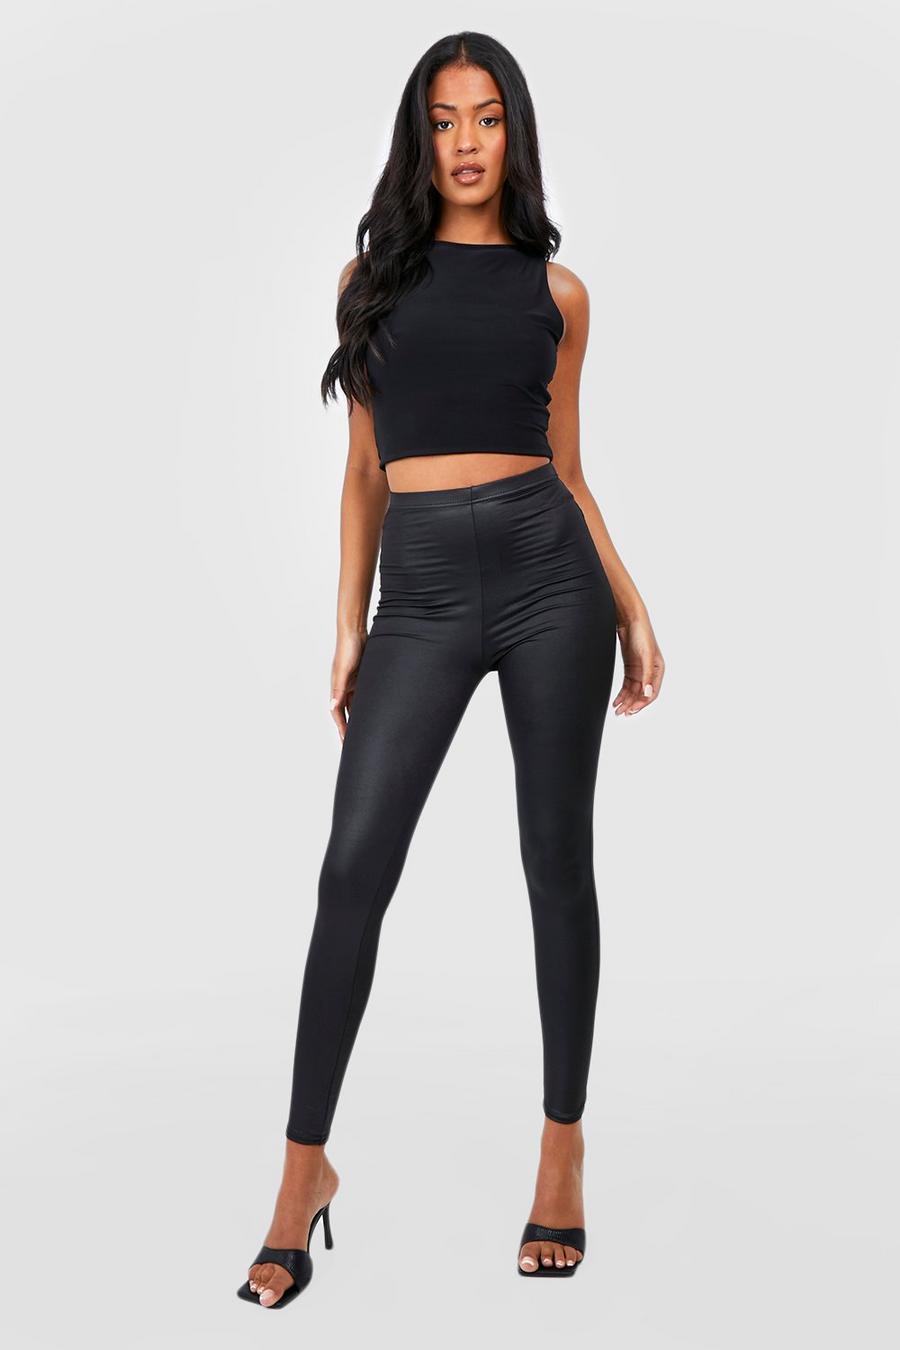 Black negro Tall Leather Look High Waisted Leggings image number 1